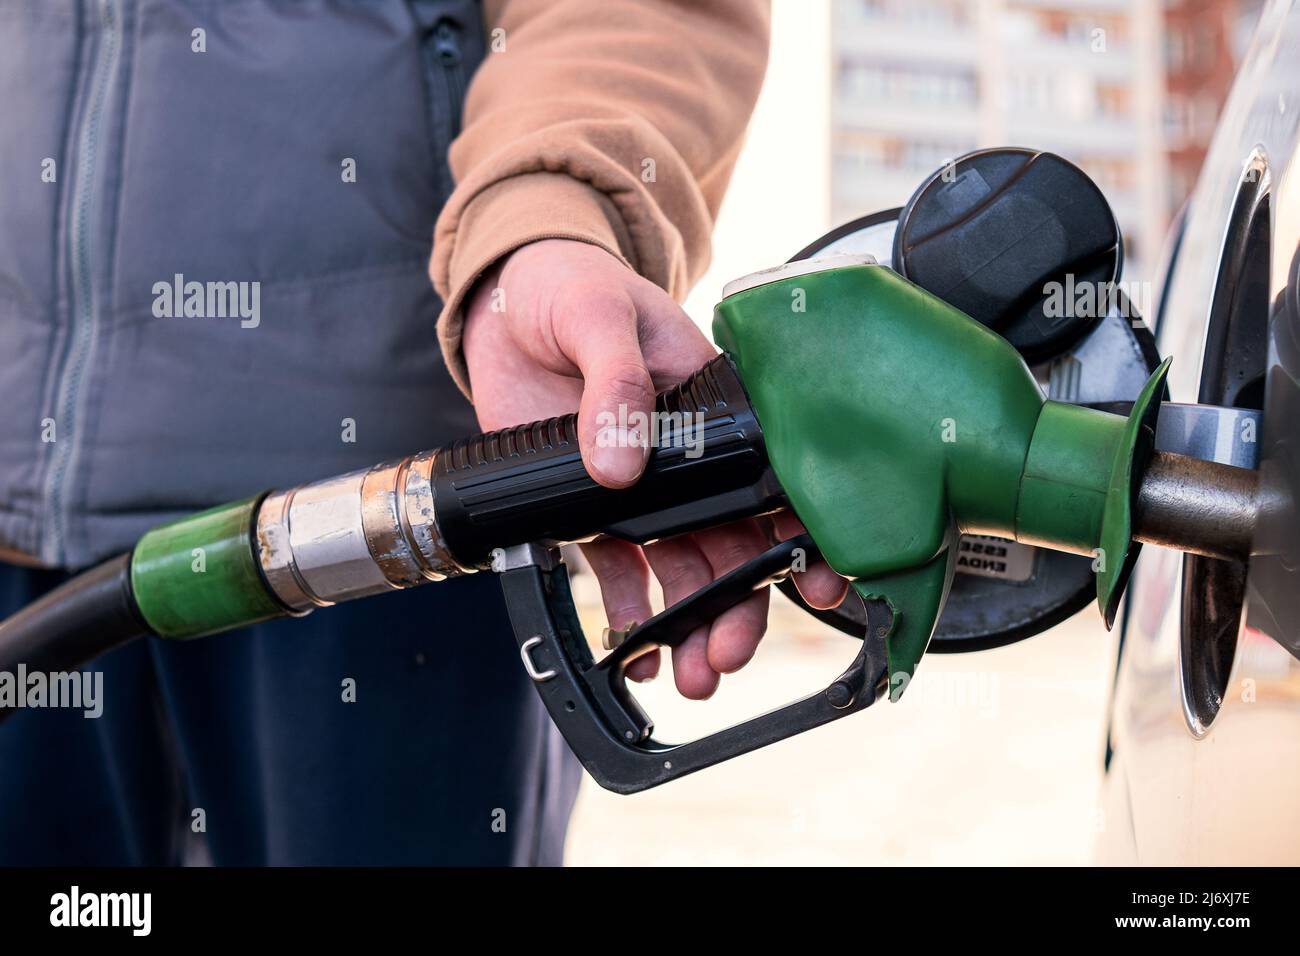 A gray car is refueling at a gas station. The man inserted a fuel pistol into the tank. Stock Photo